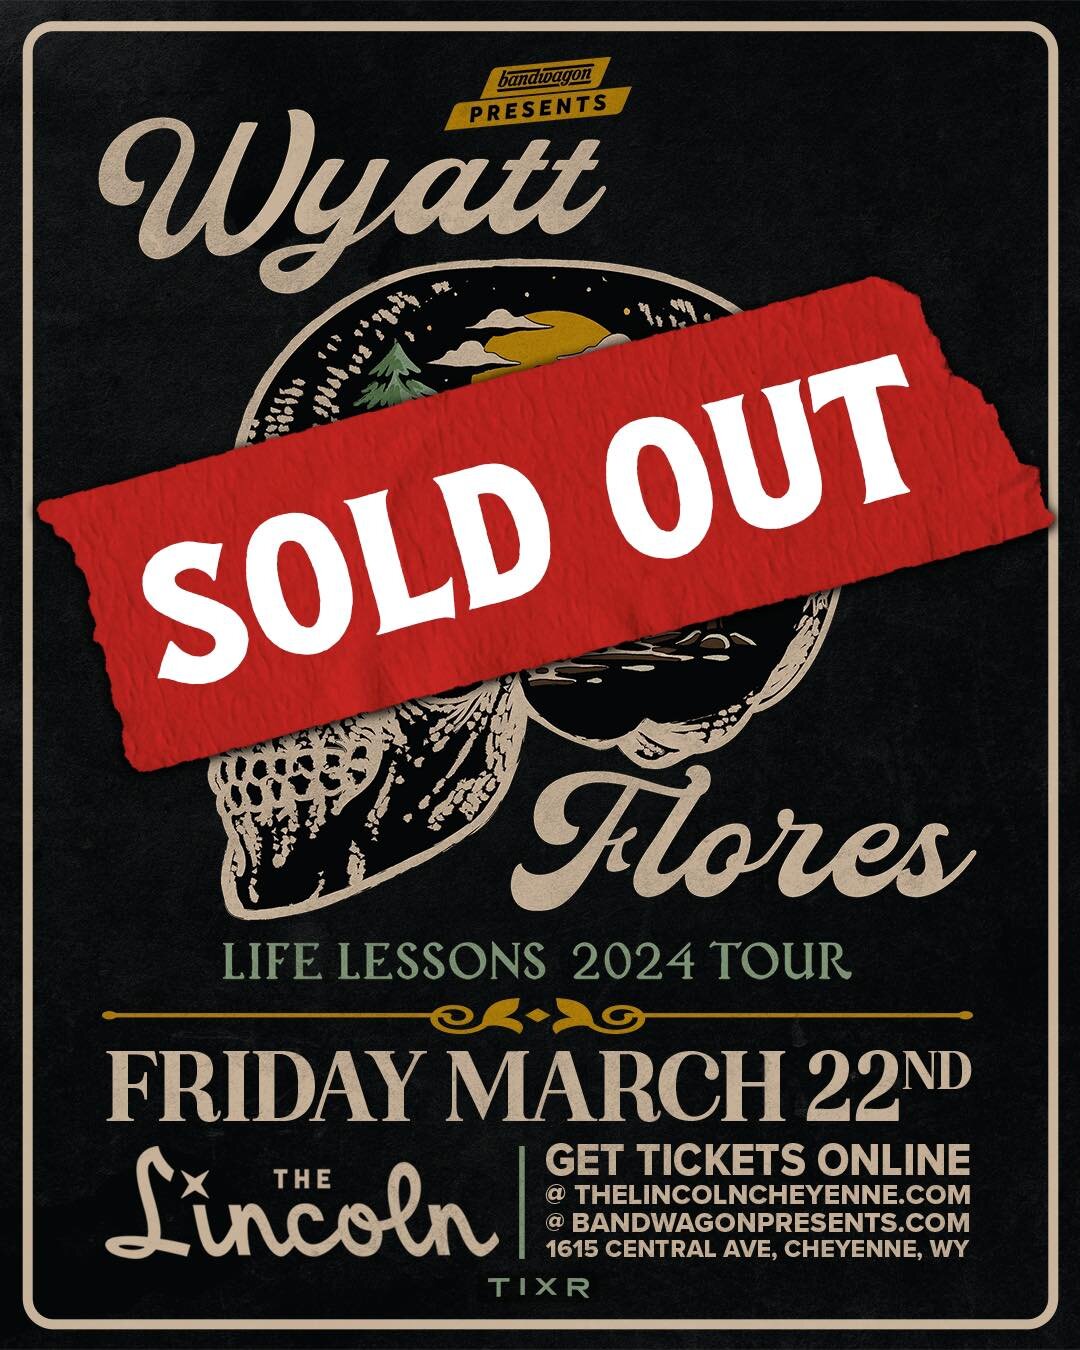 Tonight marks @officialwyattflores Cheyenne debut on his &quot;Life Lessons&quot; tour alongside Zach Russell. Doors open at 7PM, and the show starts at 8PM. If you were fortunate to snag tickets, we&rsquo;ll see you tonight!🤠
@bandwagonpresents  #t